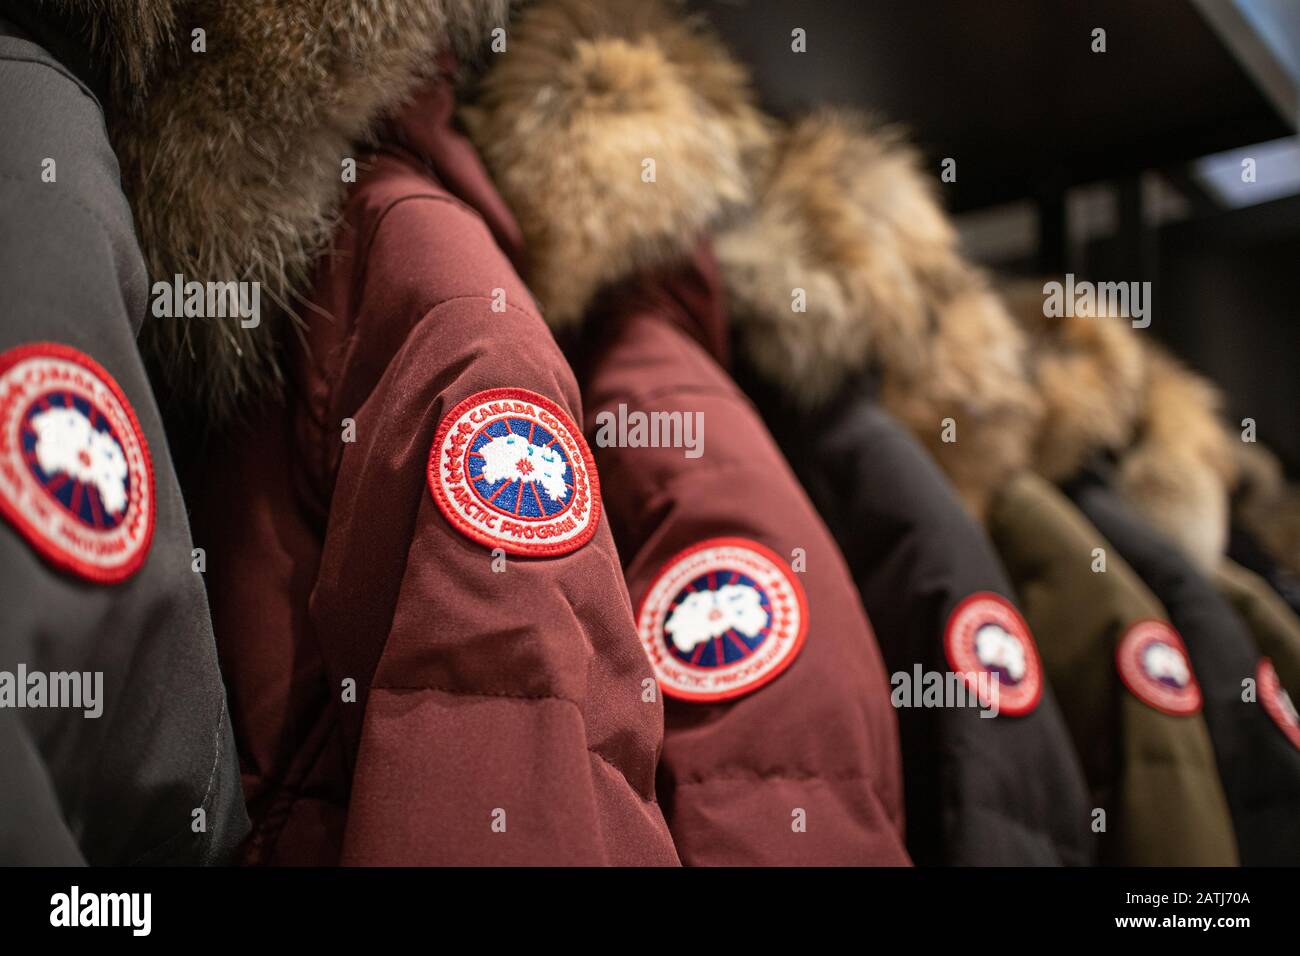 Canada Goose Jacket High Resolution Stock Photography and Images - Alamy